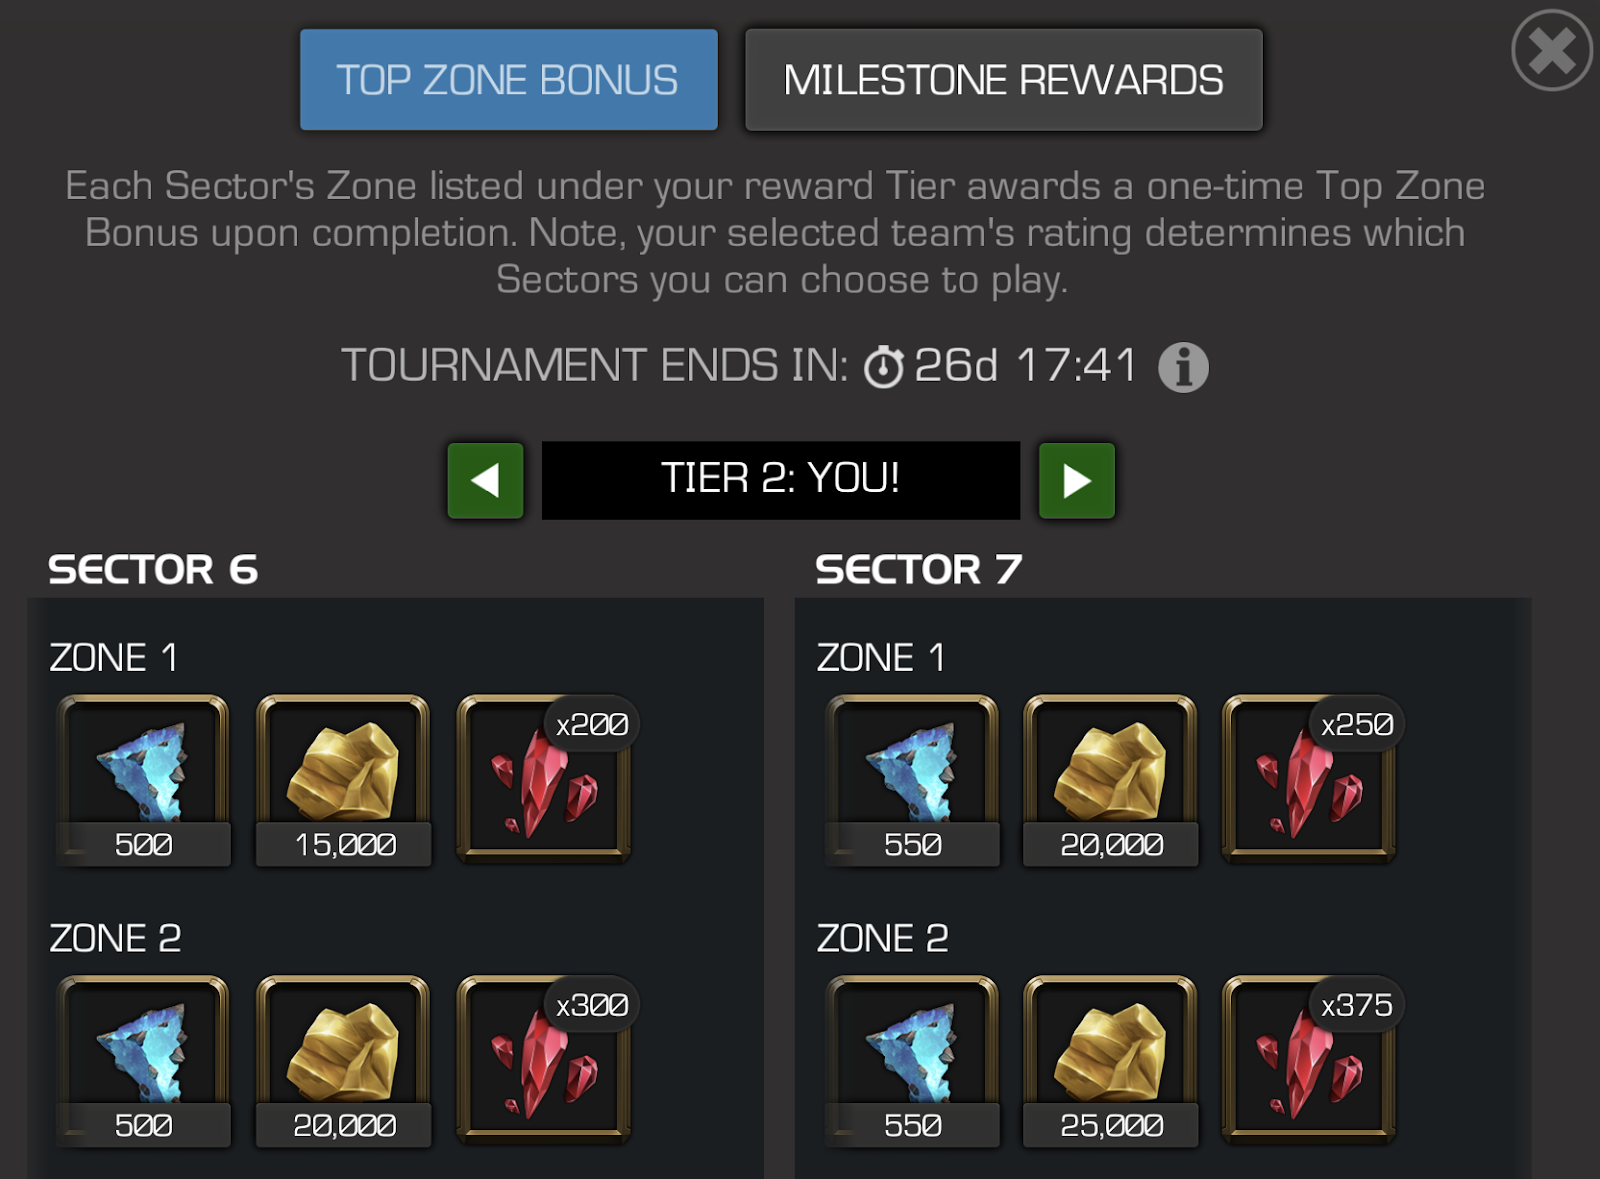 A screenshot showing an example of the top zone and milestone rewards screen